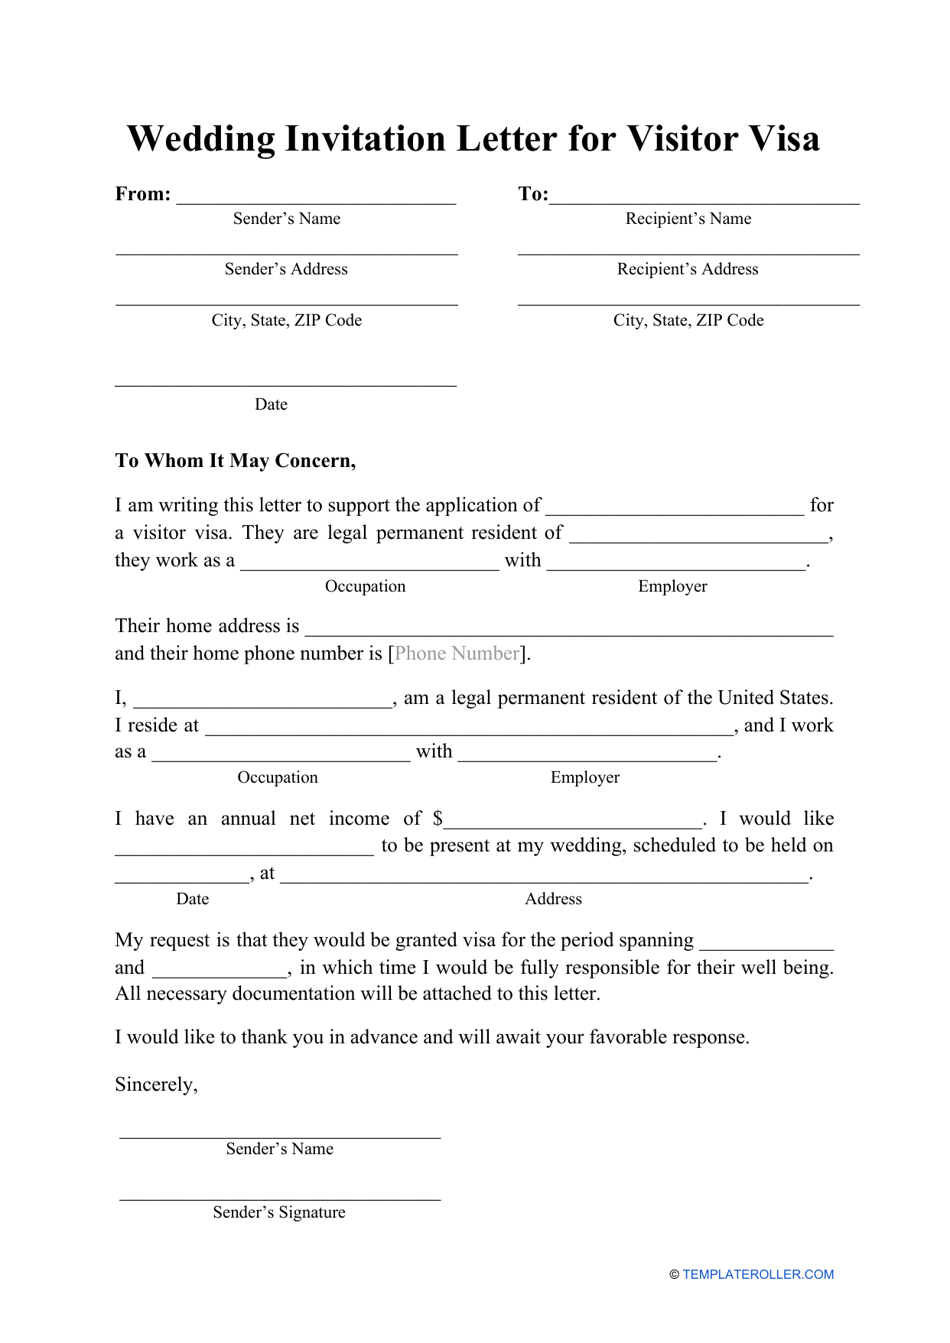 Wedding Invitation Letter for Visitor Visa Template, Page 1